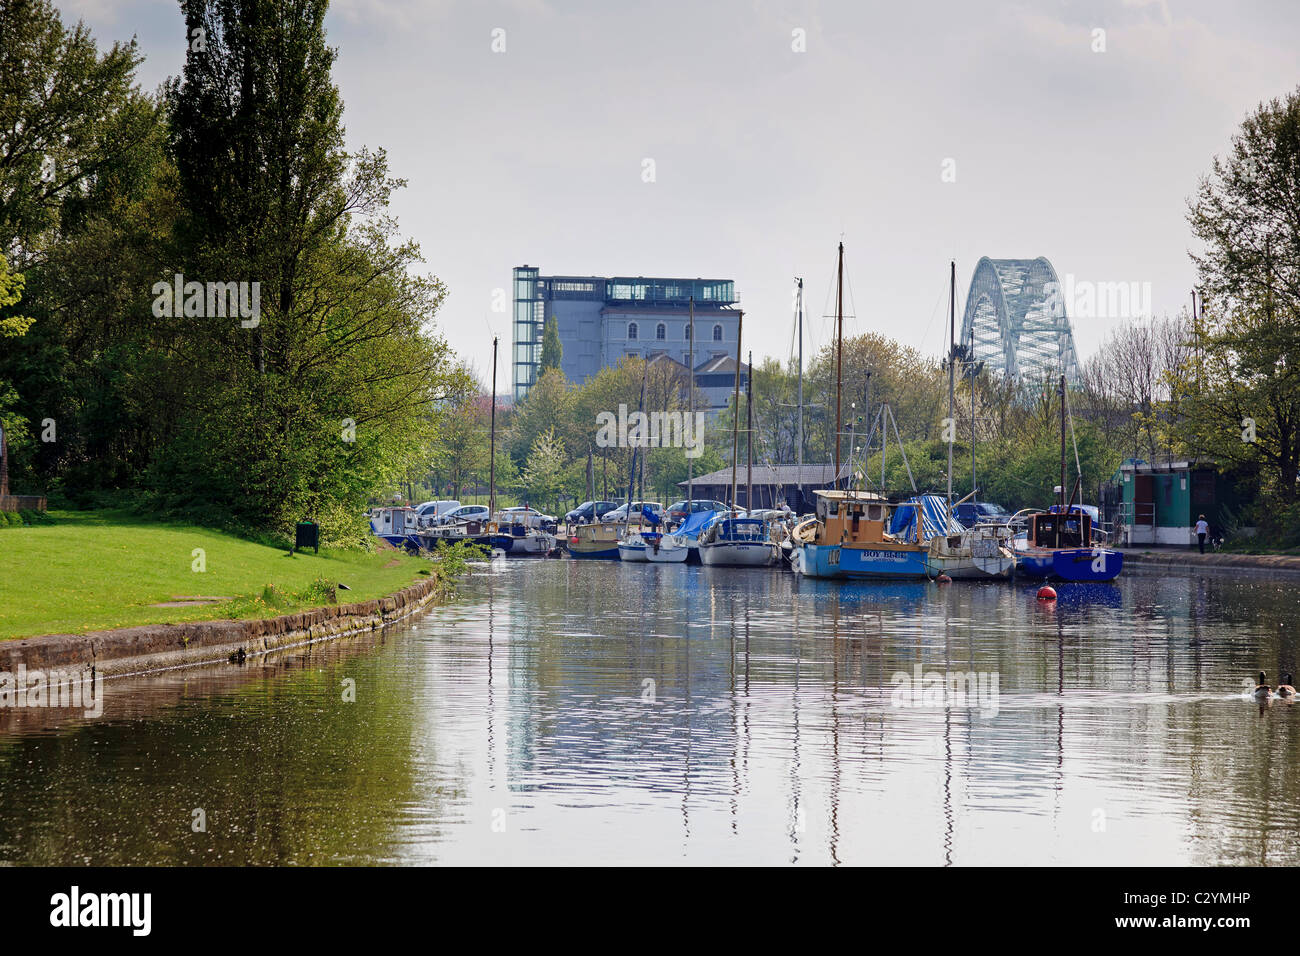 Spike Island Widnes yacht basin sur l'ancien canal St. Helens Sankey valley. Banque D'Images